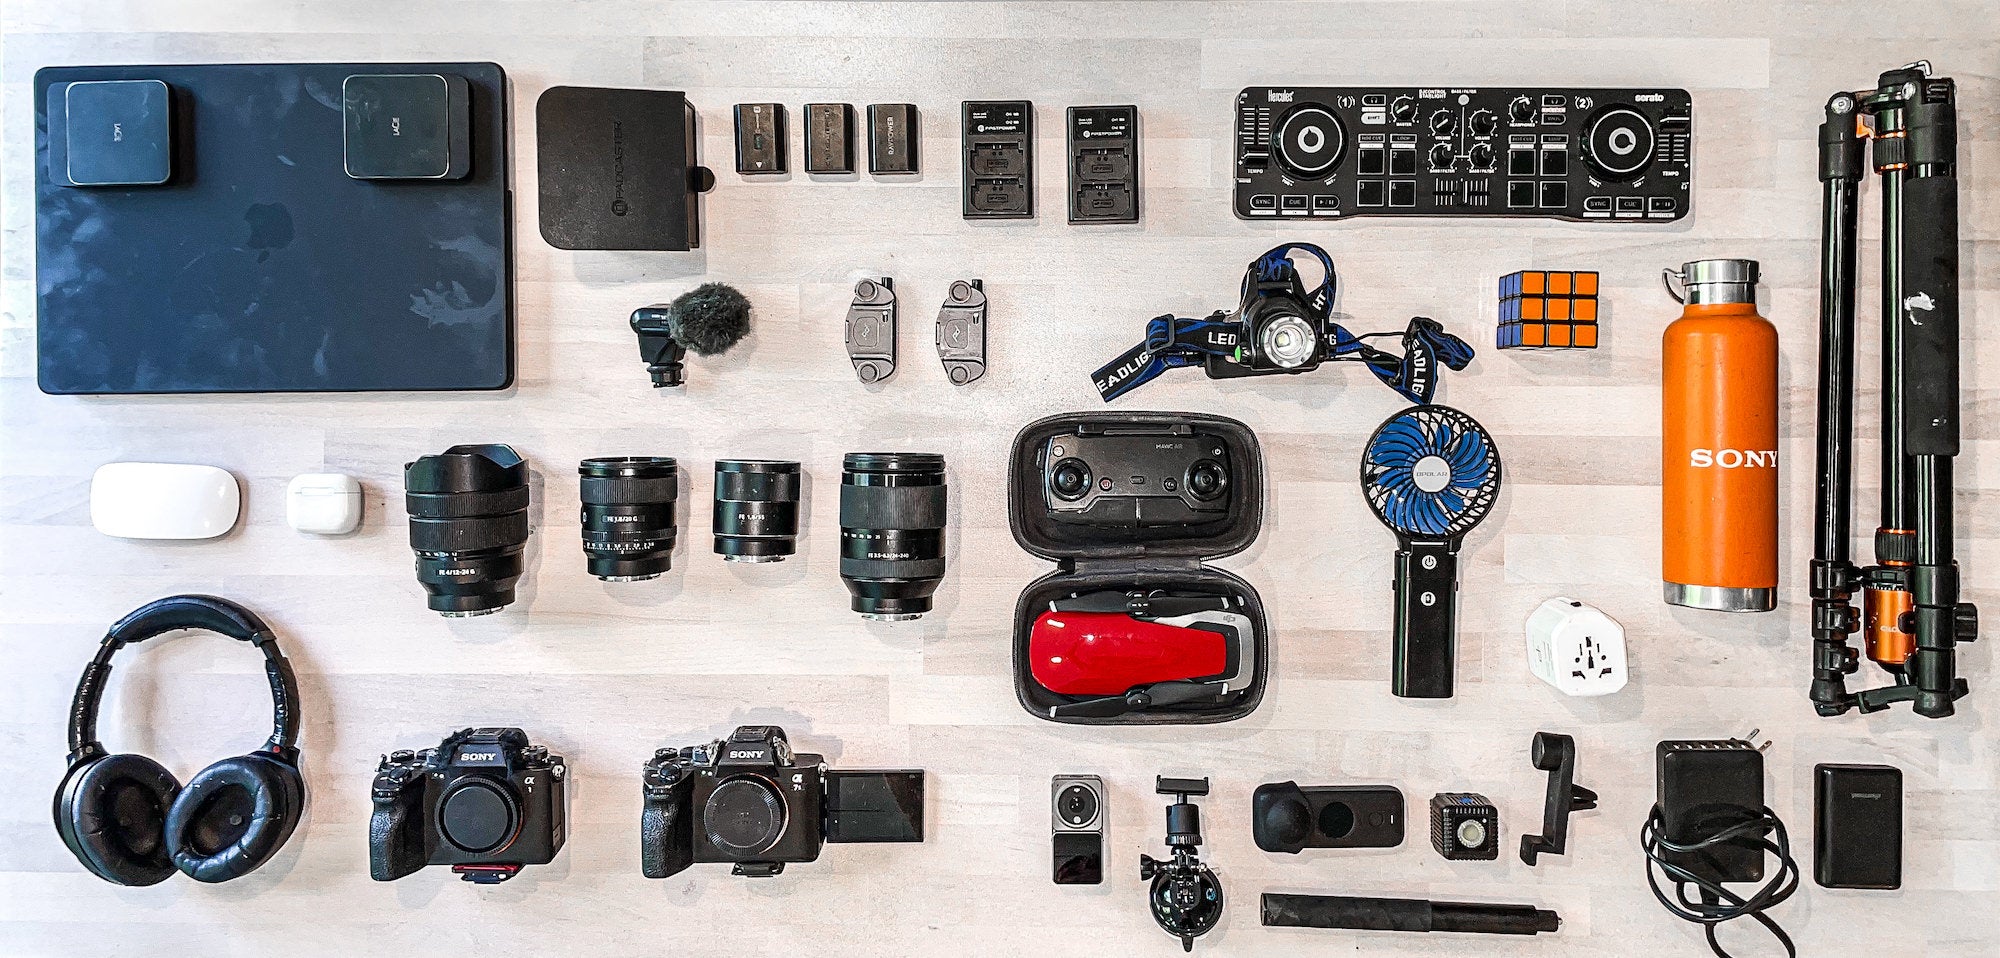 Louis Cole's Daily Vlogging Kit